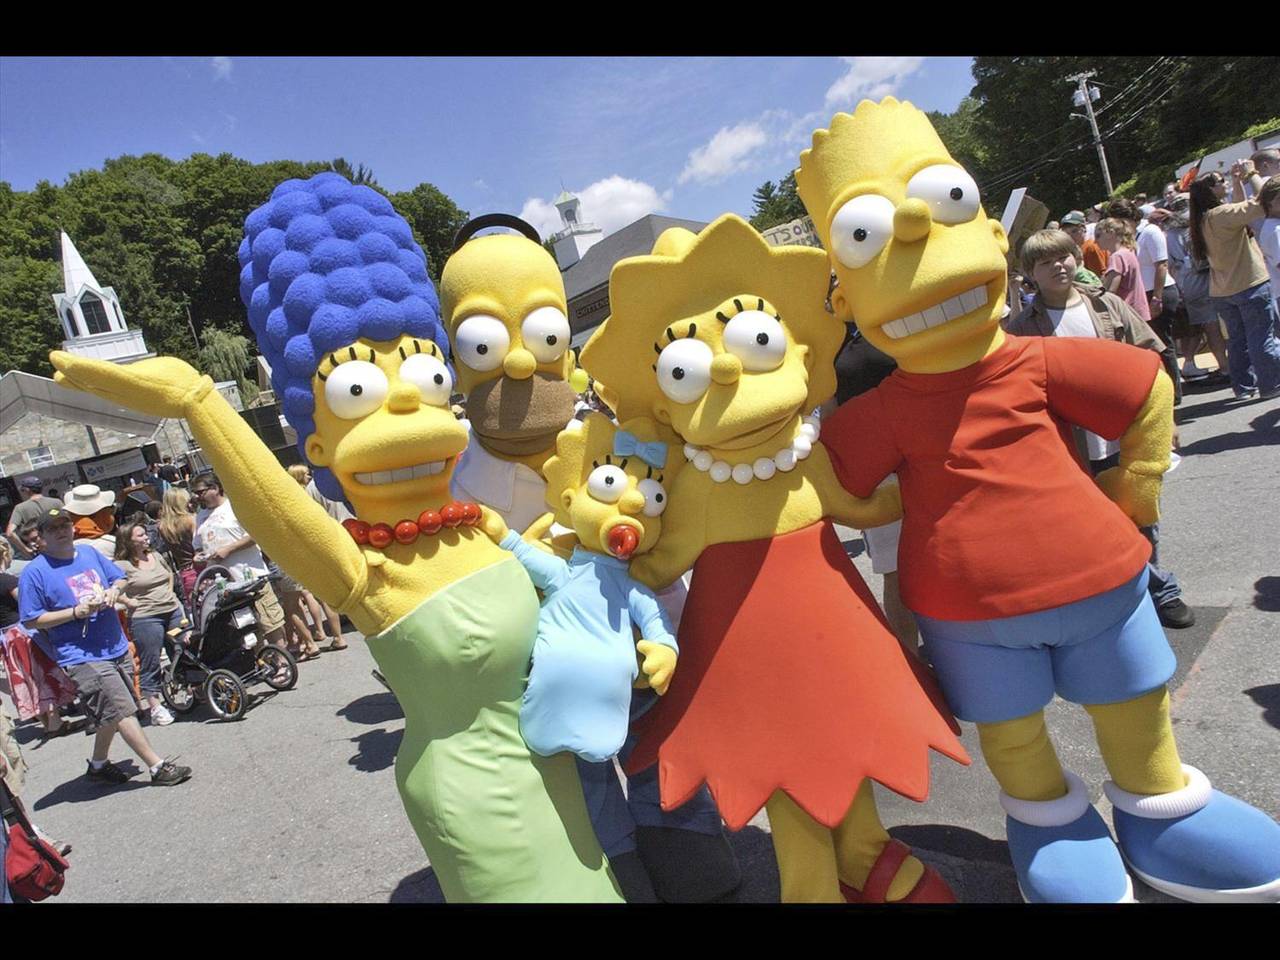 Characters from The Simpsons pose before the premiere of "The Simpsons Movie", Springfield, Vermont...